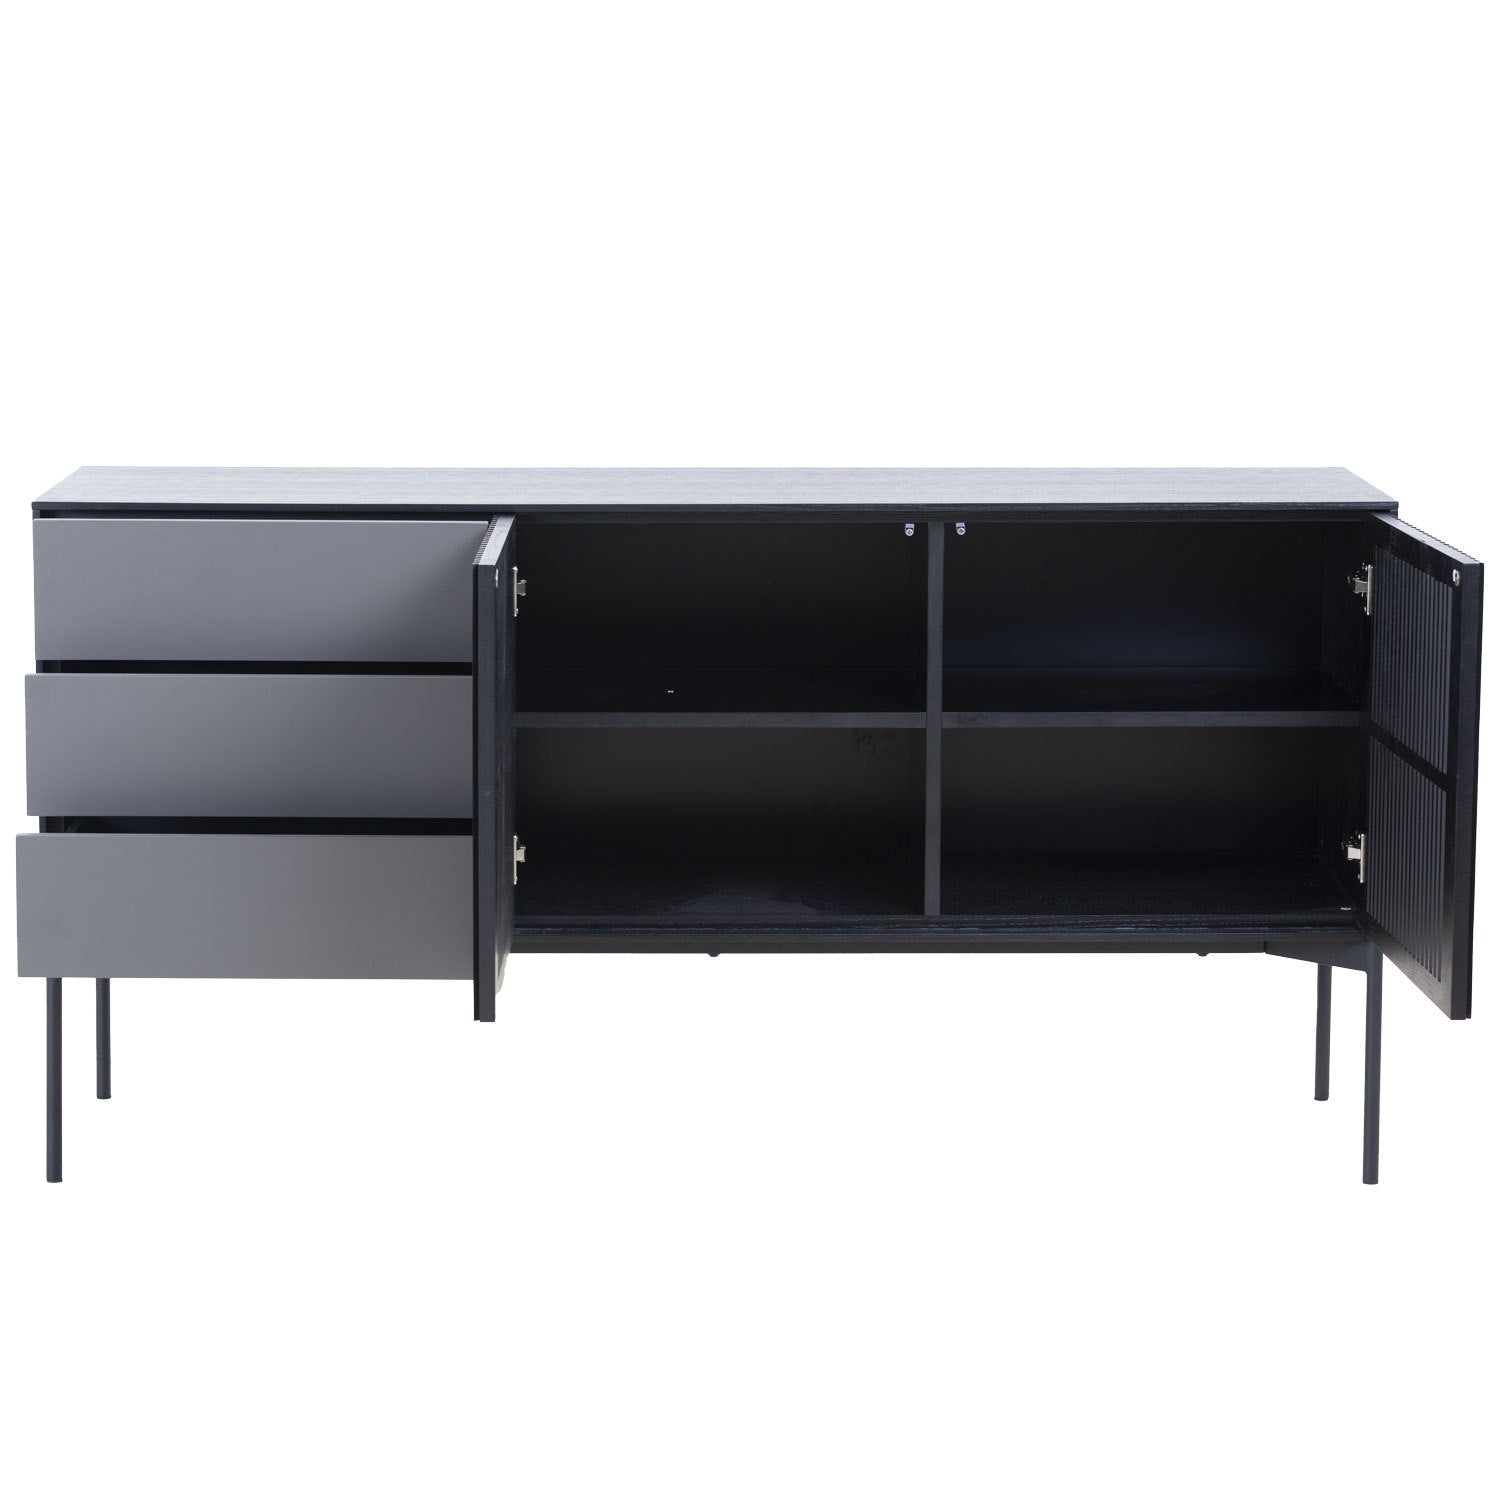 62.4" Mid Century Sideboard Cabinet Buffet Table black-wood + stainless steel